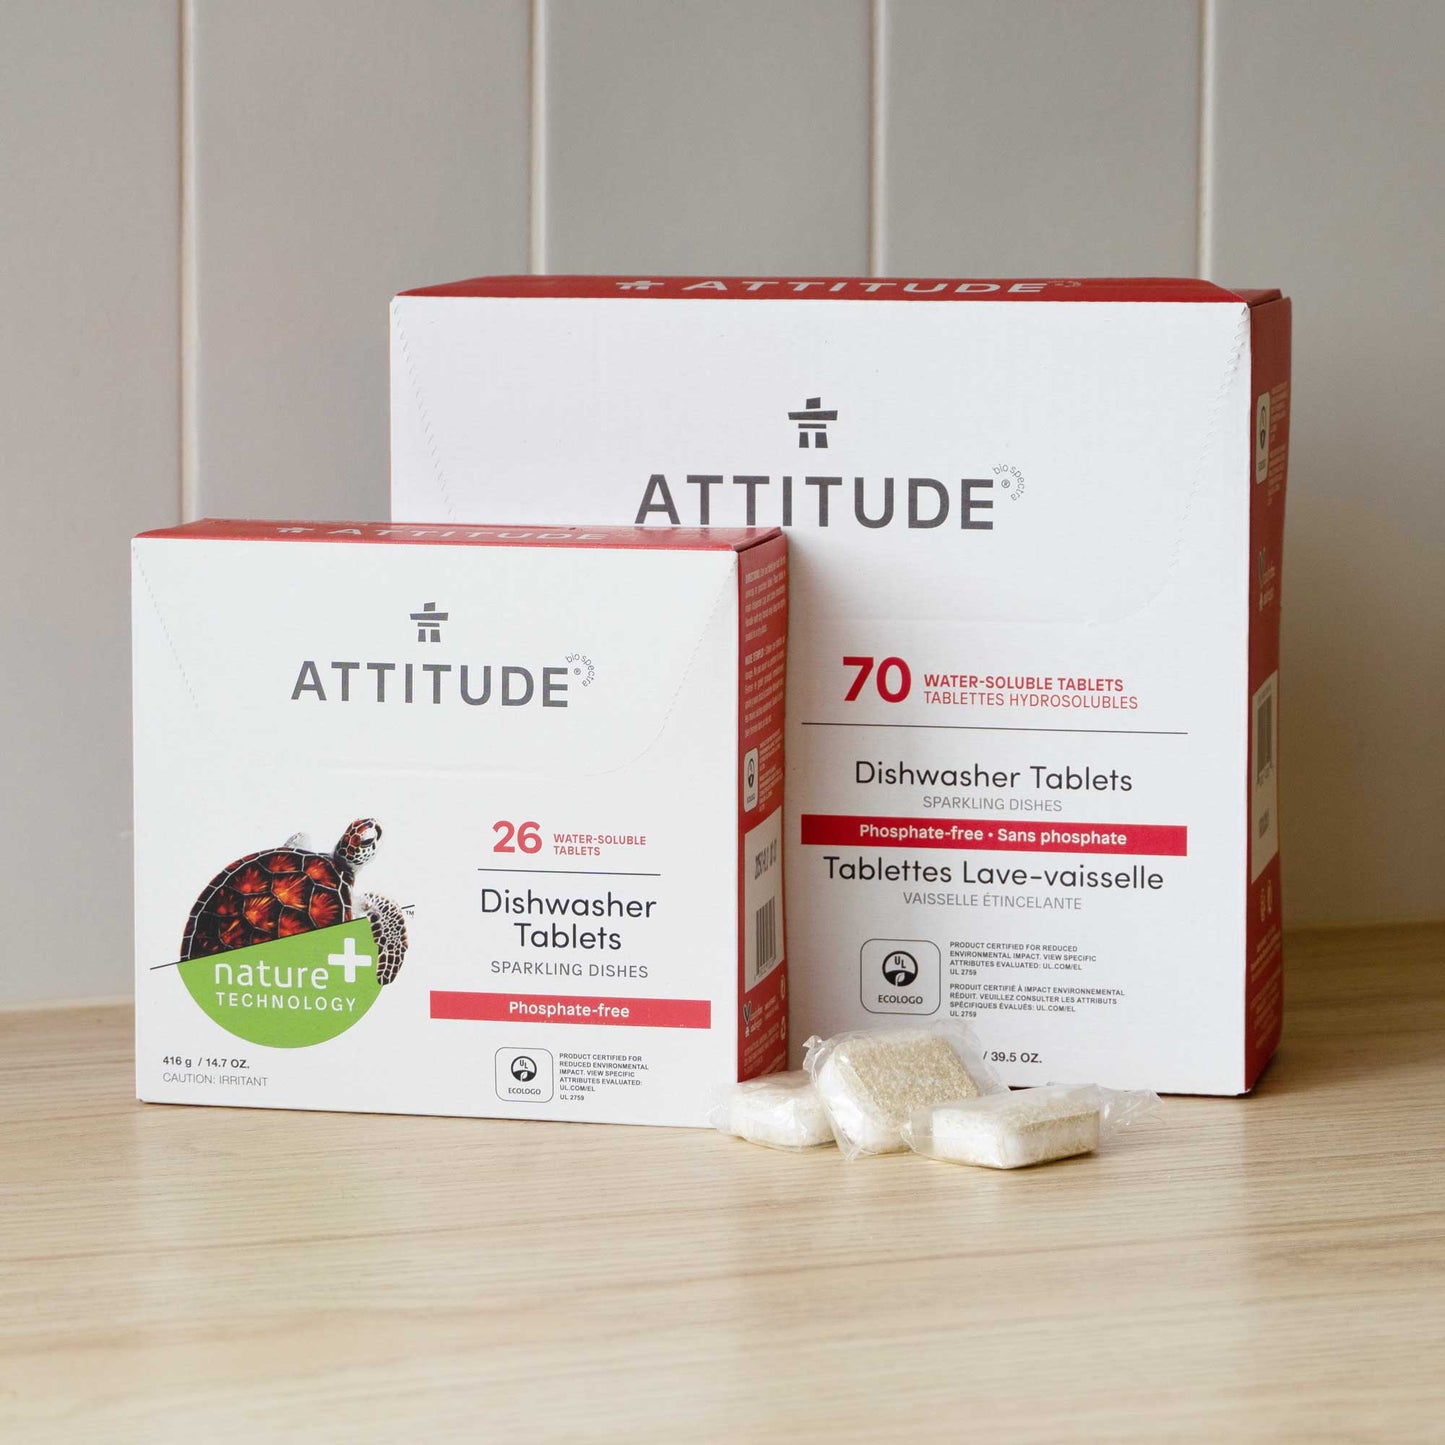 ATTITUDE écodoses Nature+ tablettes lave-vaisselle _fr?_hover? ALL_VARIANTS